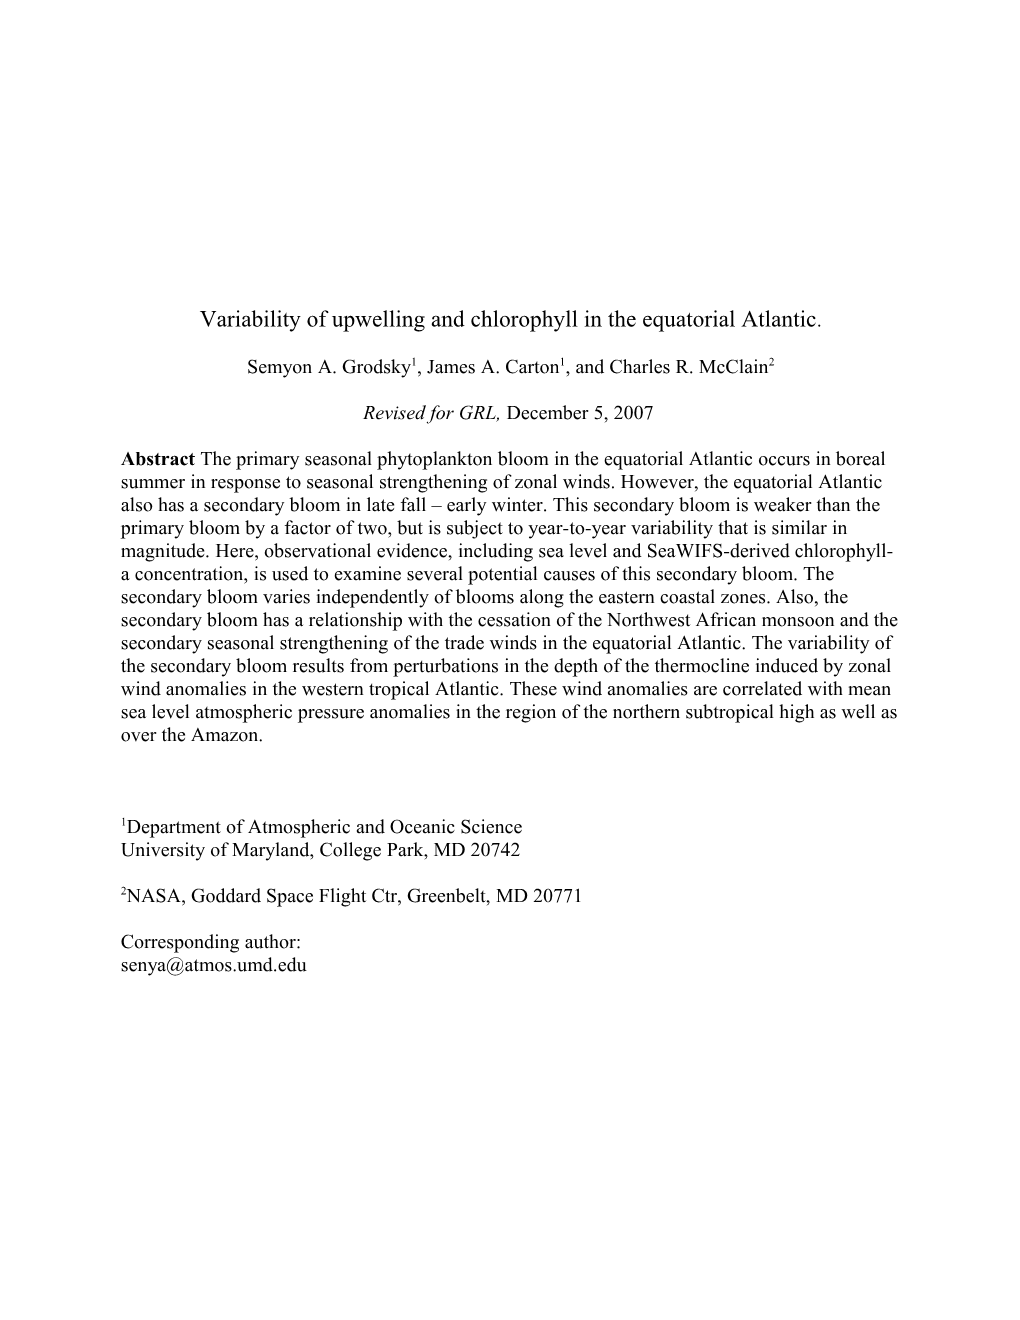 Seasonal and Interannual Variability of Upwelling and Chlorophyll Bloom in the Equatorial